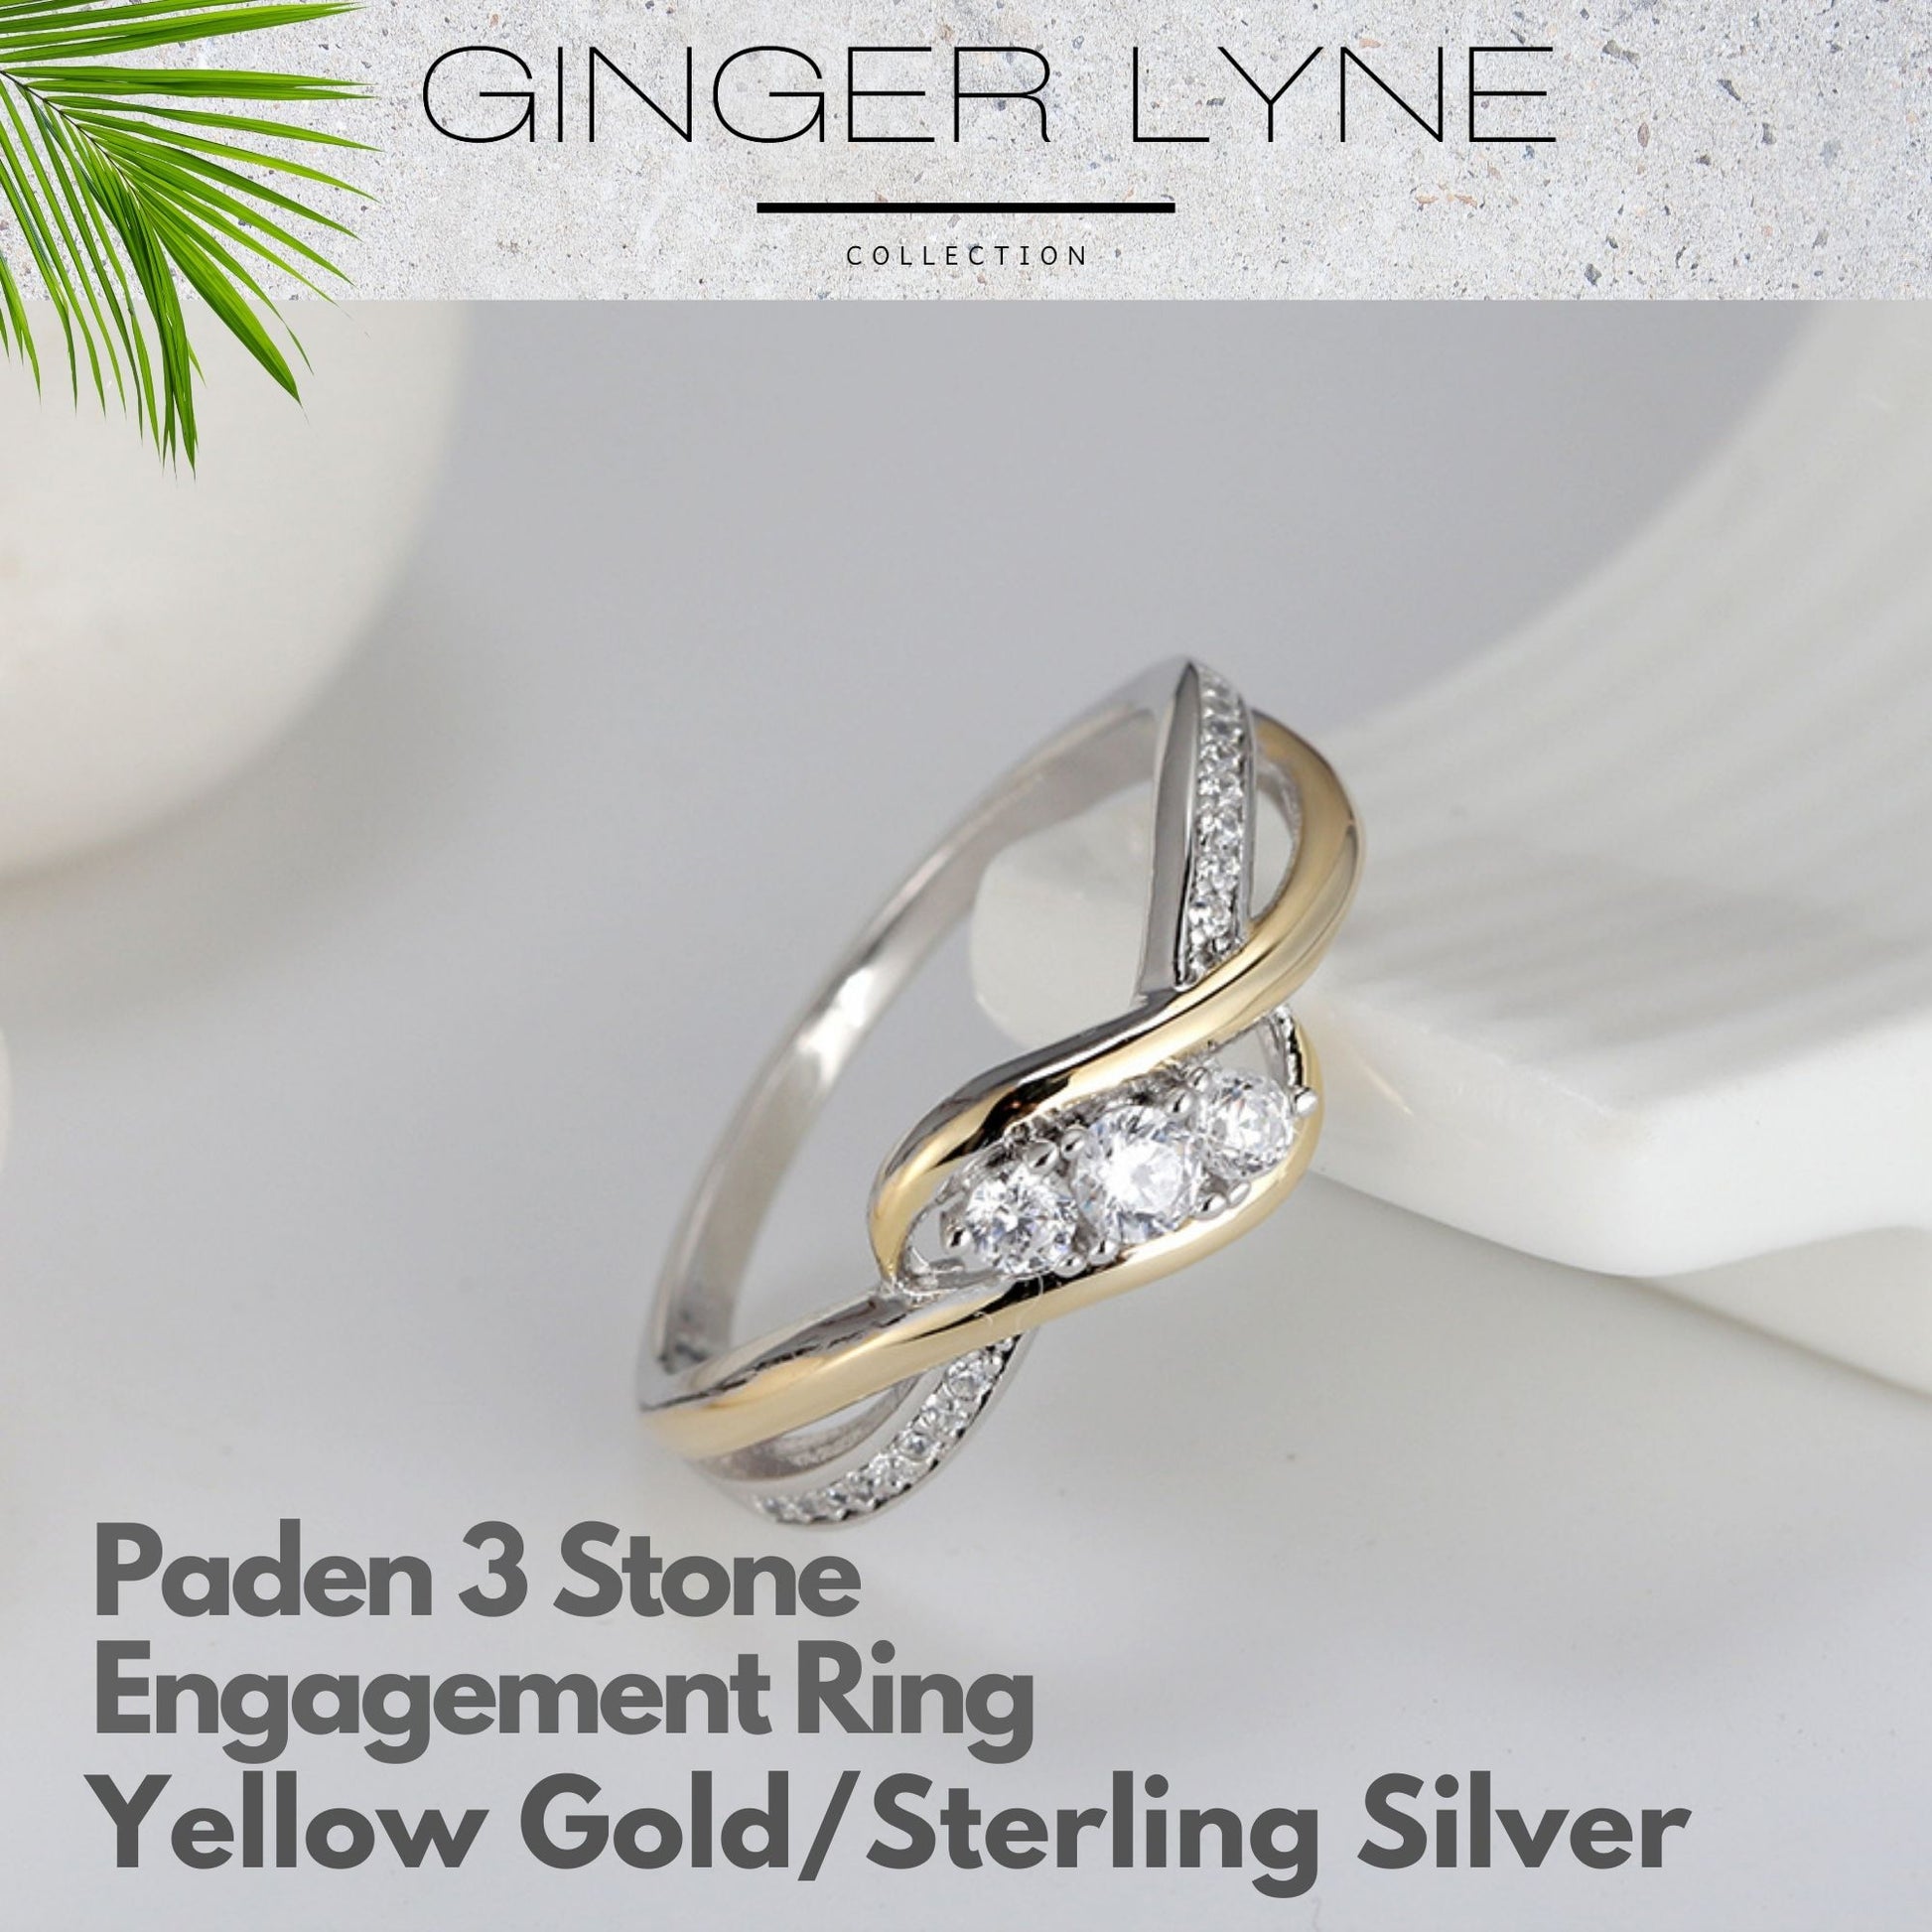 3 Stone Engagement Ring  for Women Sterling Silver Promise Ring for Her Ginger Lyne Collection